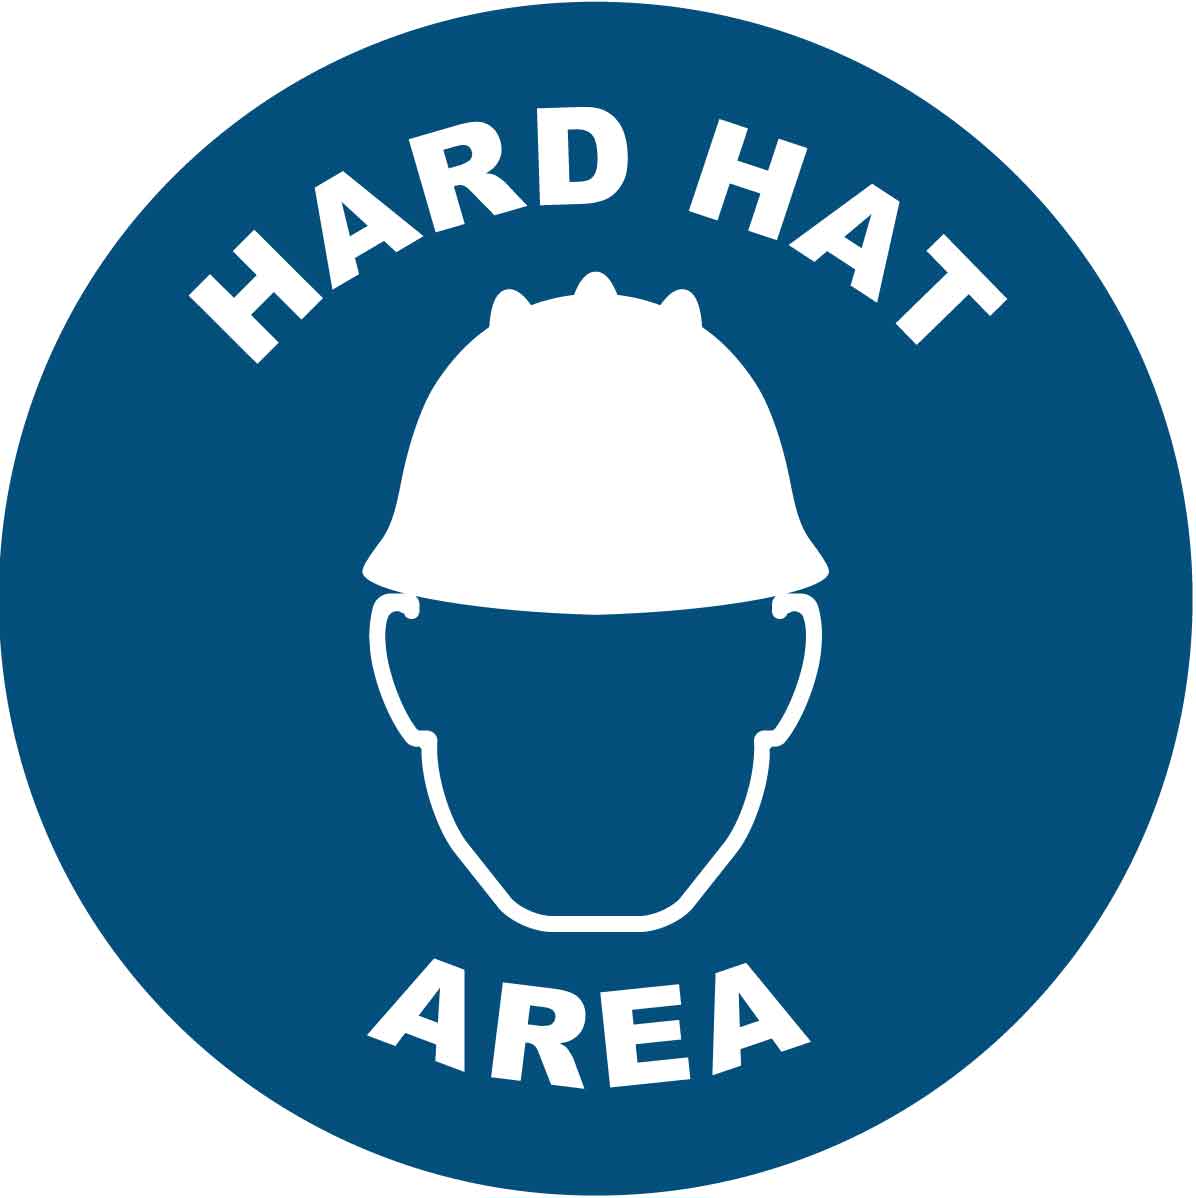 Hard Hat Area Decal